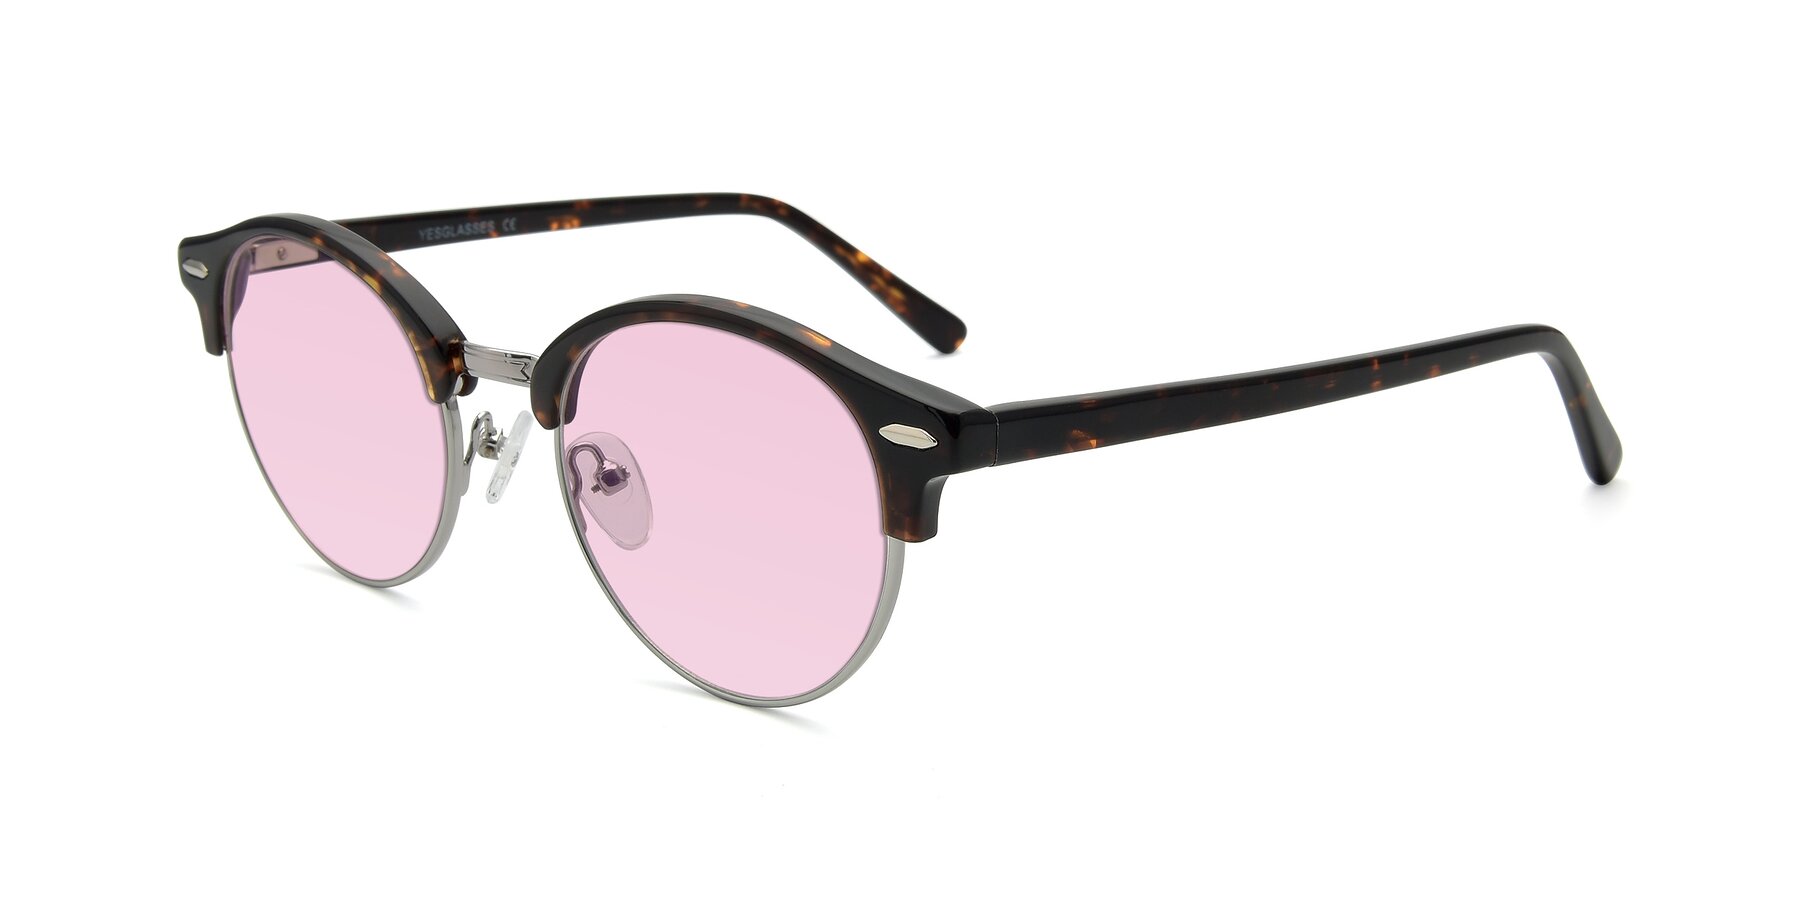 Angle of 17462 in Tortoise-Silver with Light Pink Tinted Lenses